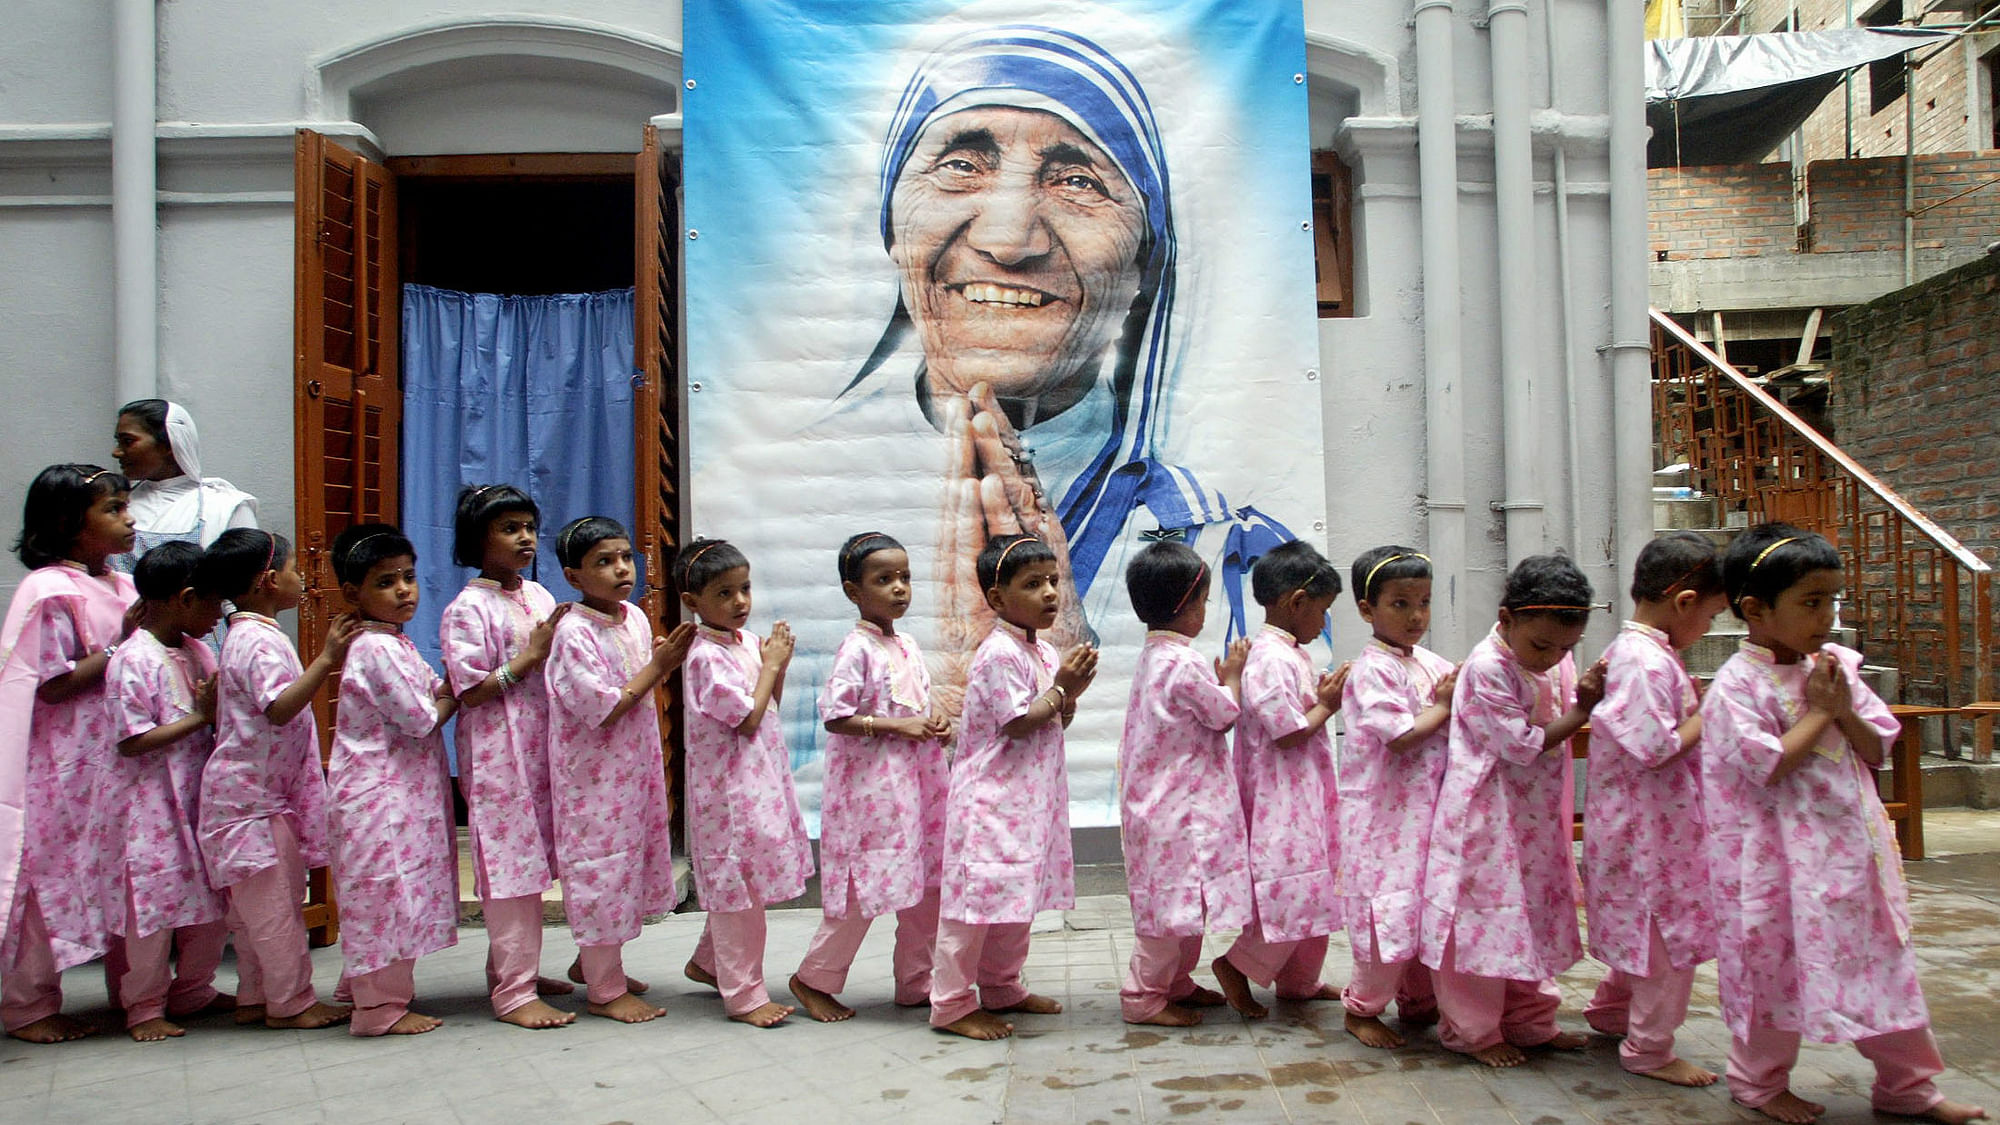 Orphaned children from the Missionaries of Charity in Kolkata. The Missionaries of Charity will close their adoption centres, citing new regulations that would allow non-traditional families to adopt children. (Photo: Reuters)